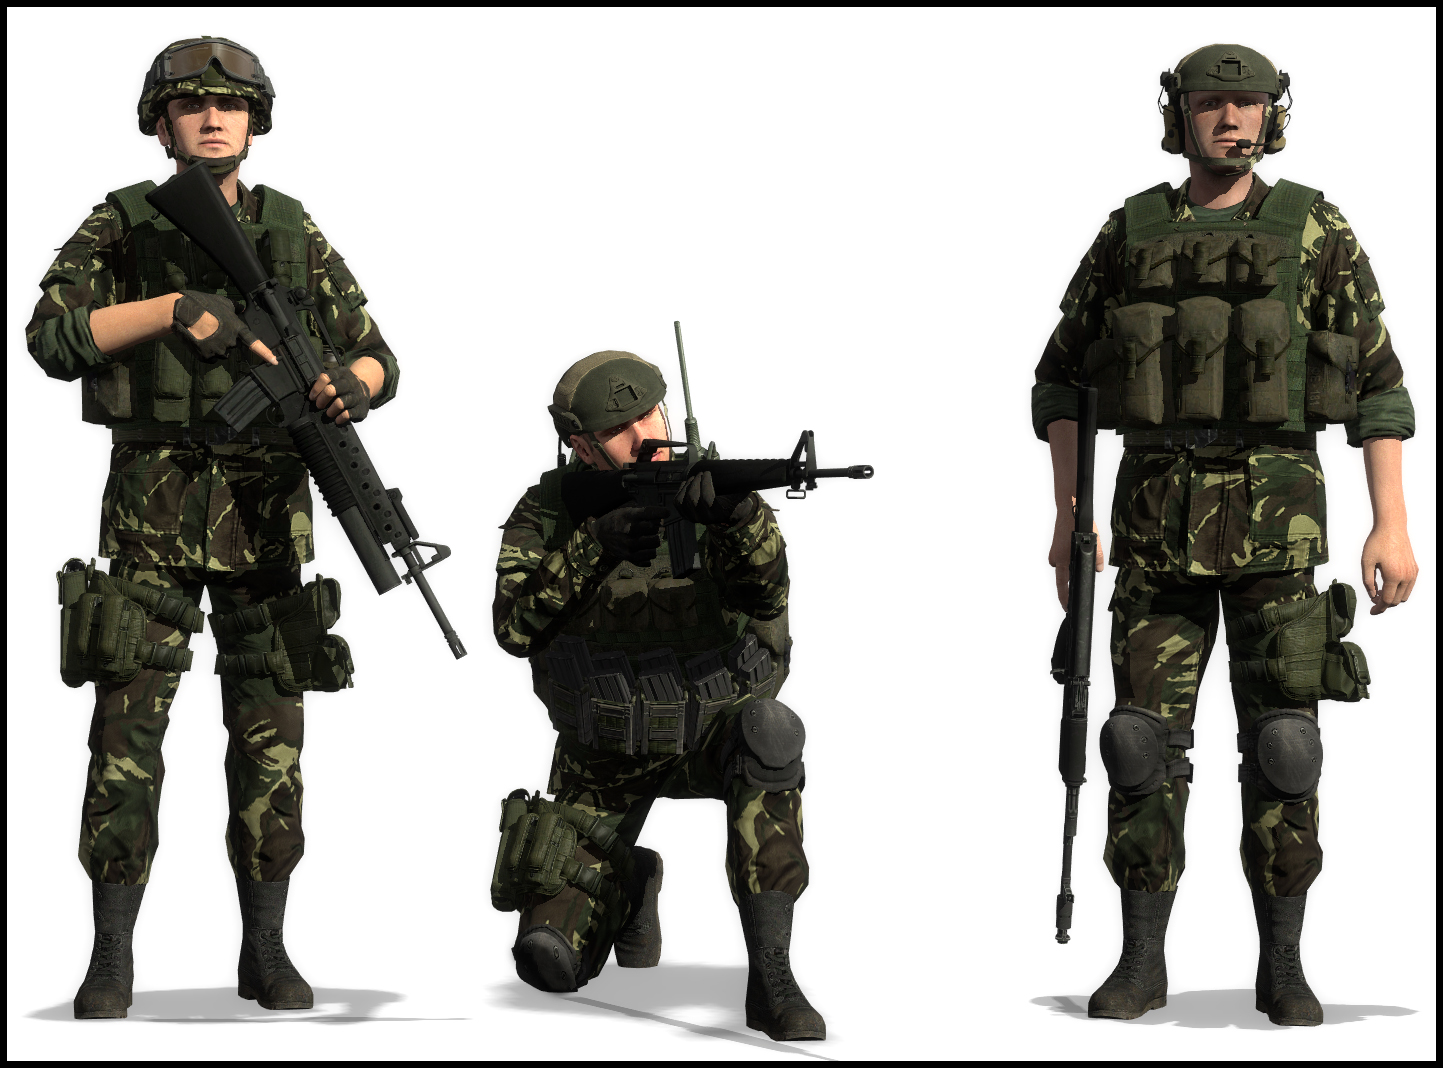 Generic South Americanish Army [WIP] by bottlefanatic on DeviantArt